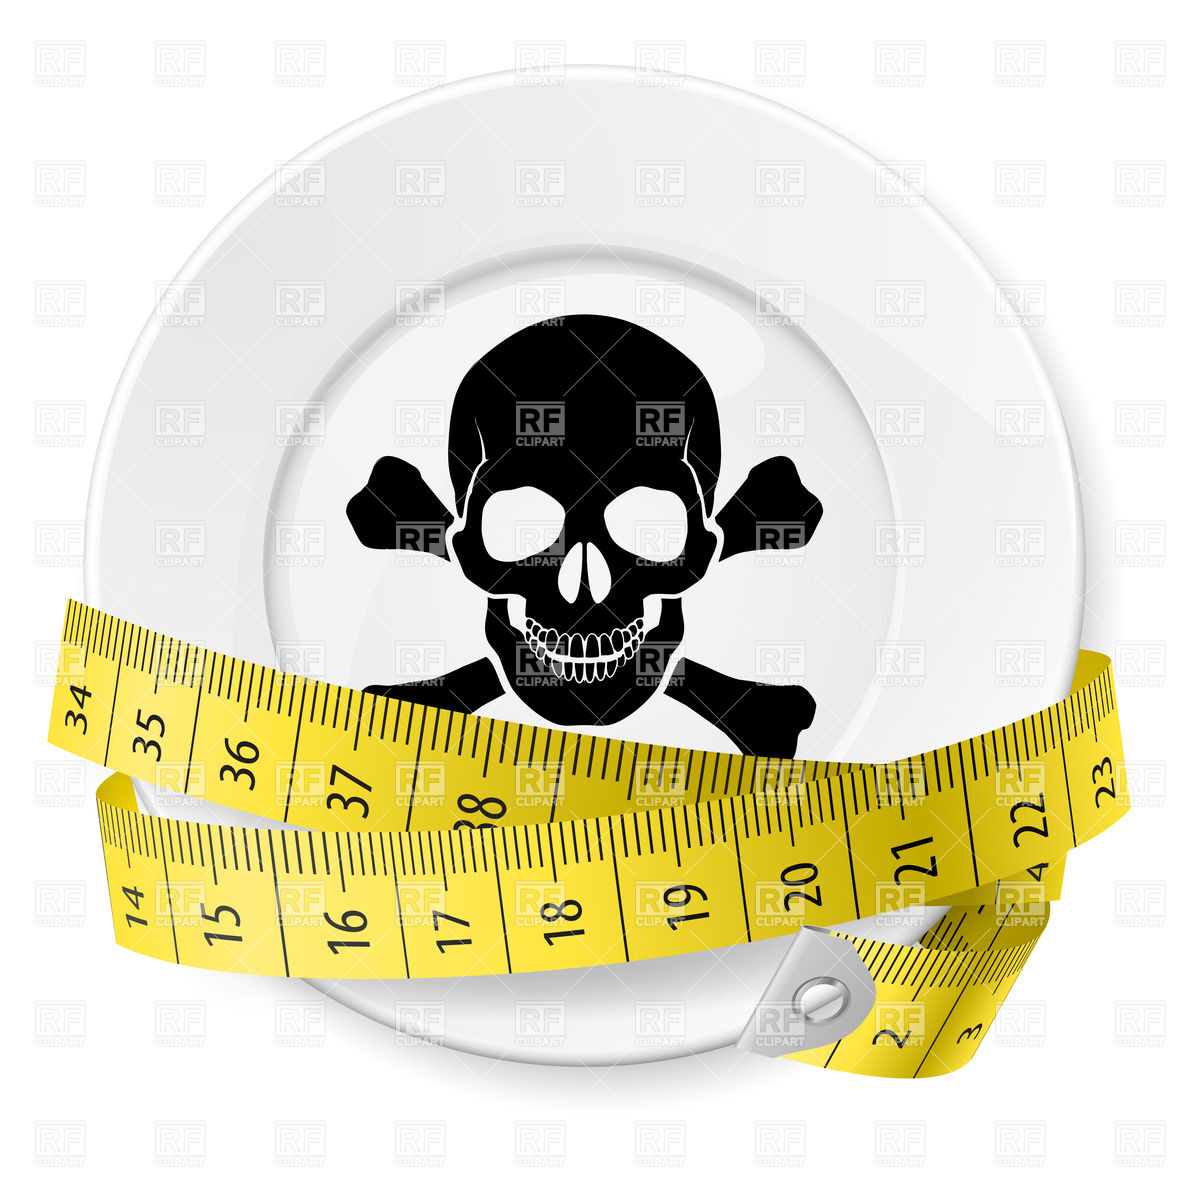 Weight Loss Tape Measure Clipart Plate With Measuring Tape And